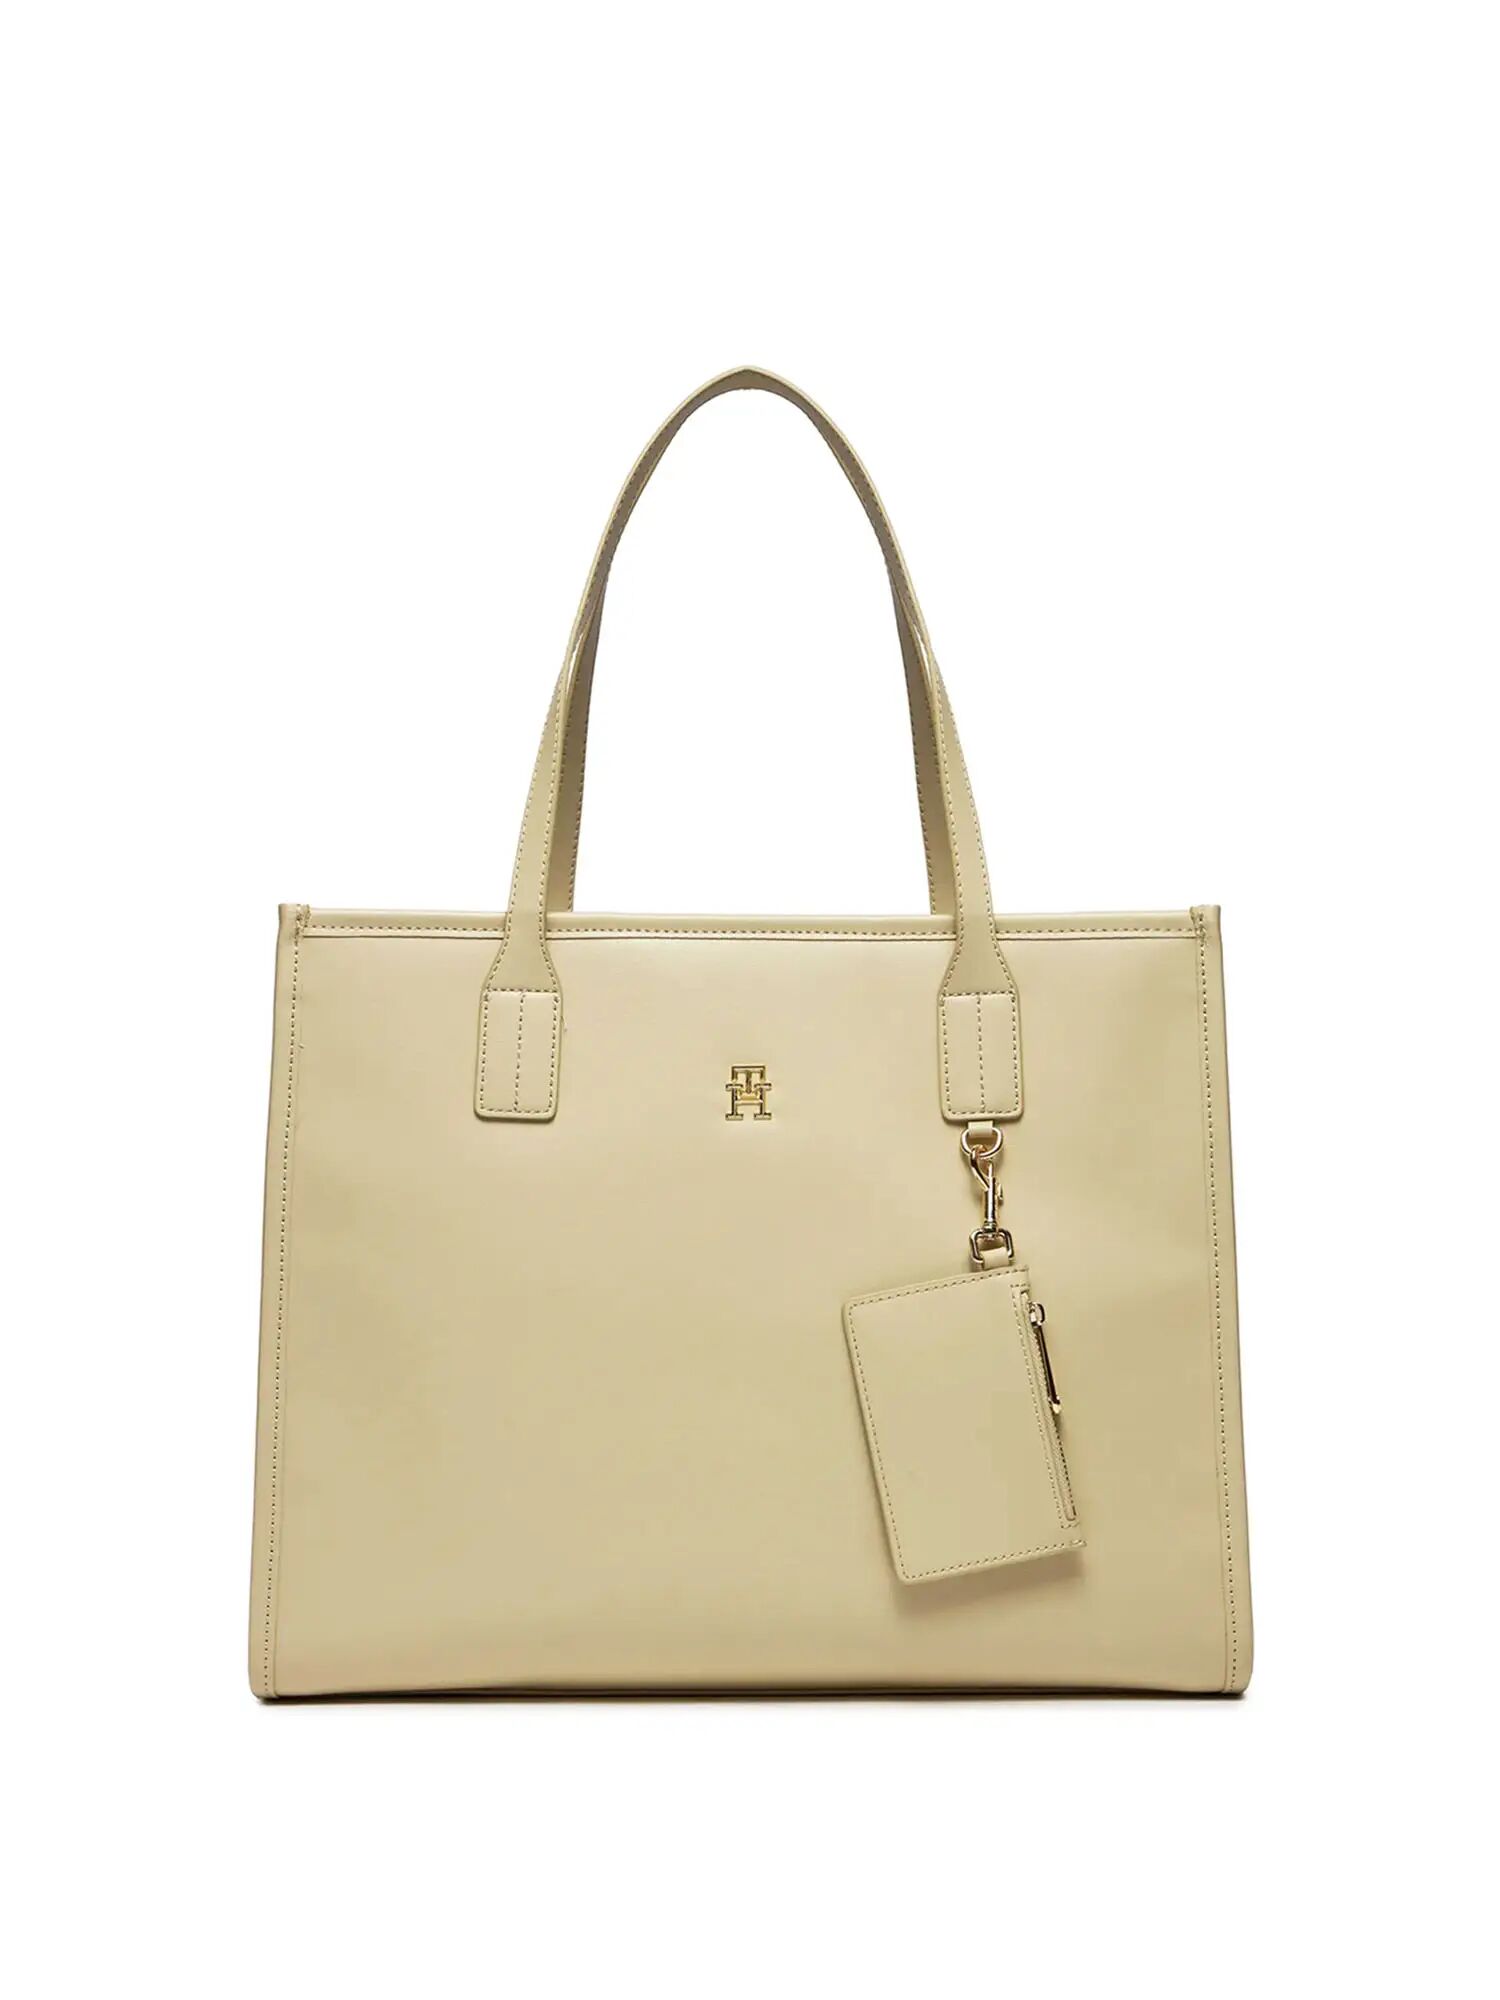 Tommy Hilfiger Tote Donna Colore Bianco BIANCO 1